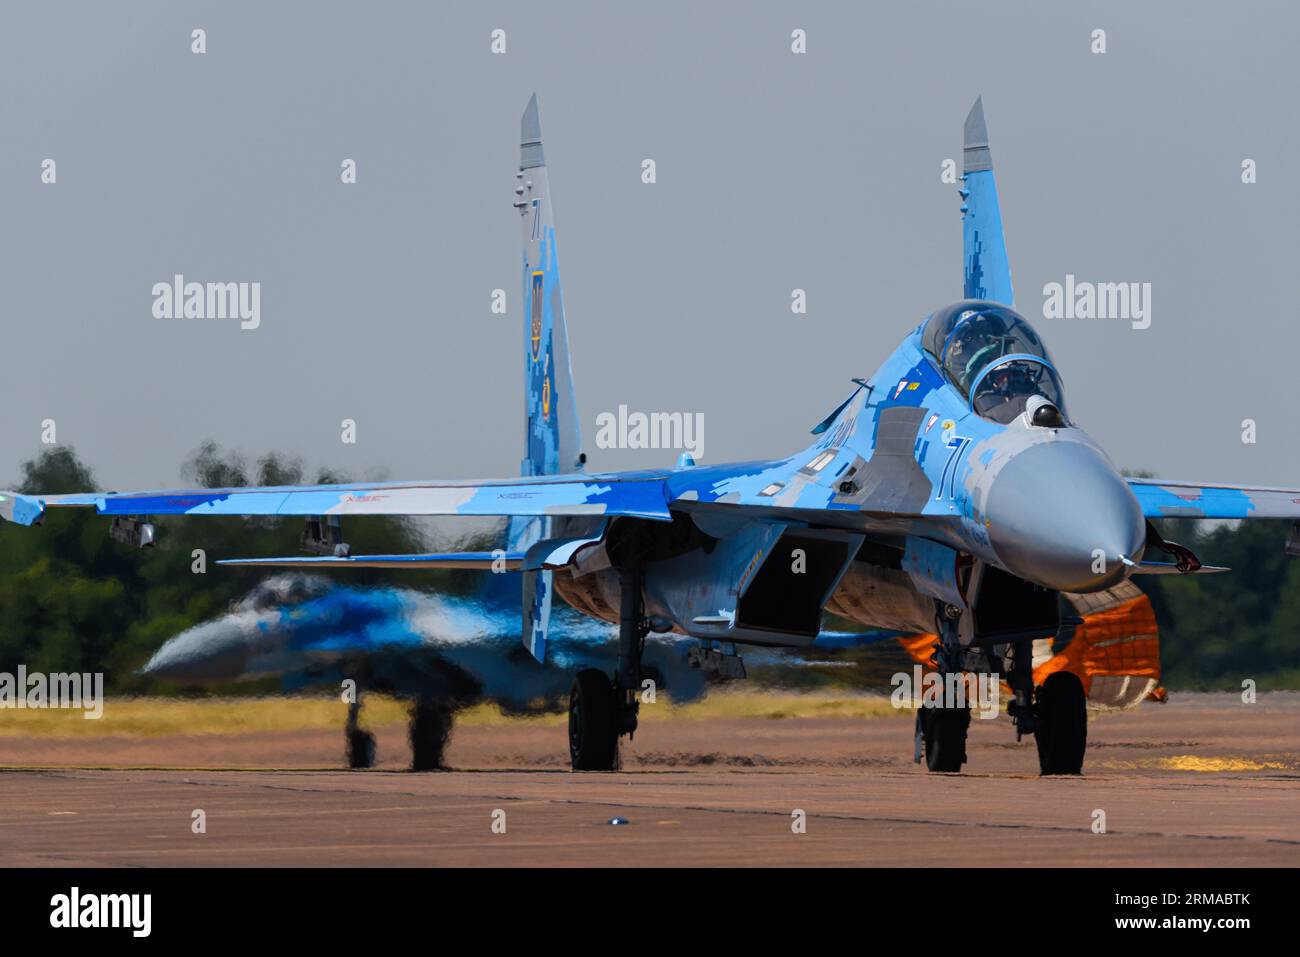 Ukrainian Air Force Sukhoi Su-27 Flanker fighter jet planes taxiing after landing at Royal International Air Tattoo, RIAT, RAF Fairford airshow, UK Stock Photo